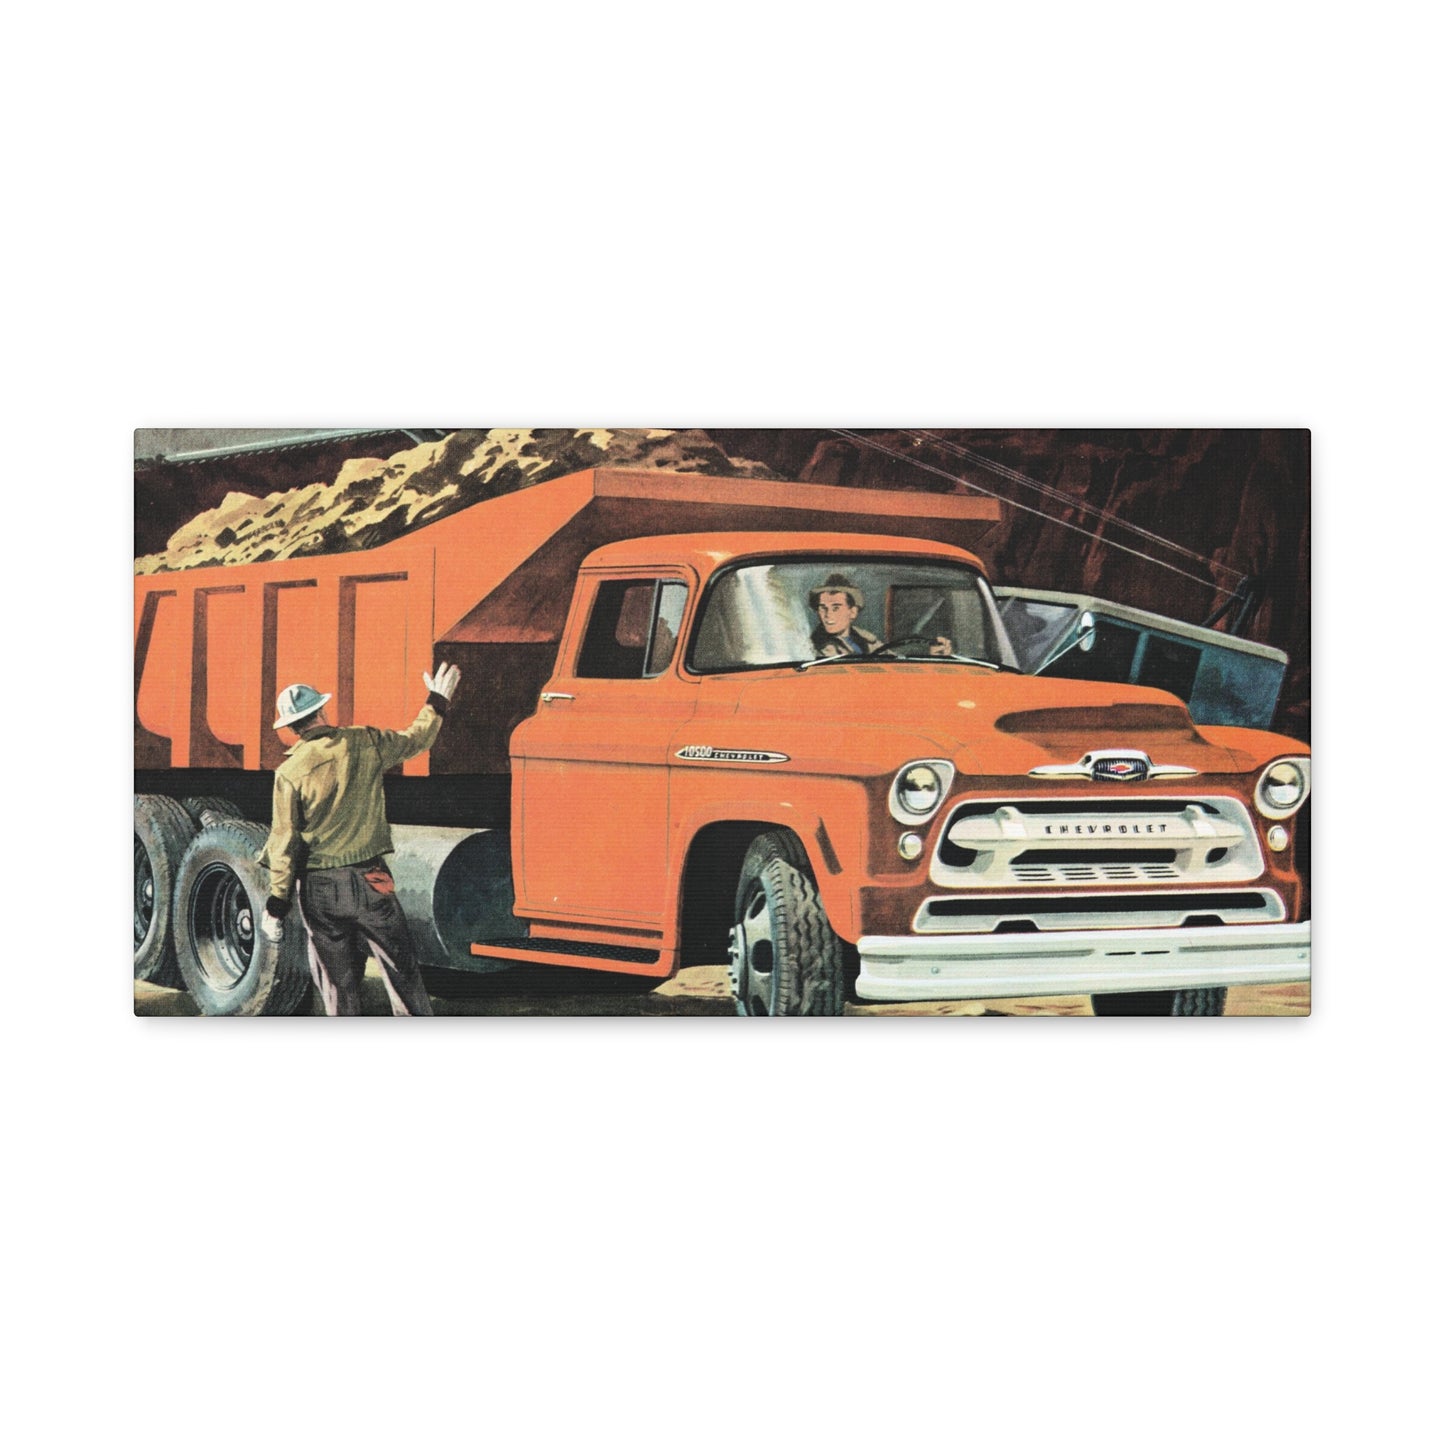 Vintage illustration of a Chevrolet Triple-Torque Tandem truck with two figures, one driving and another guiding.